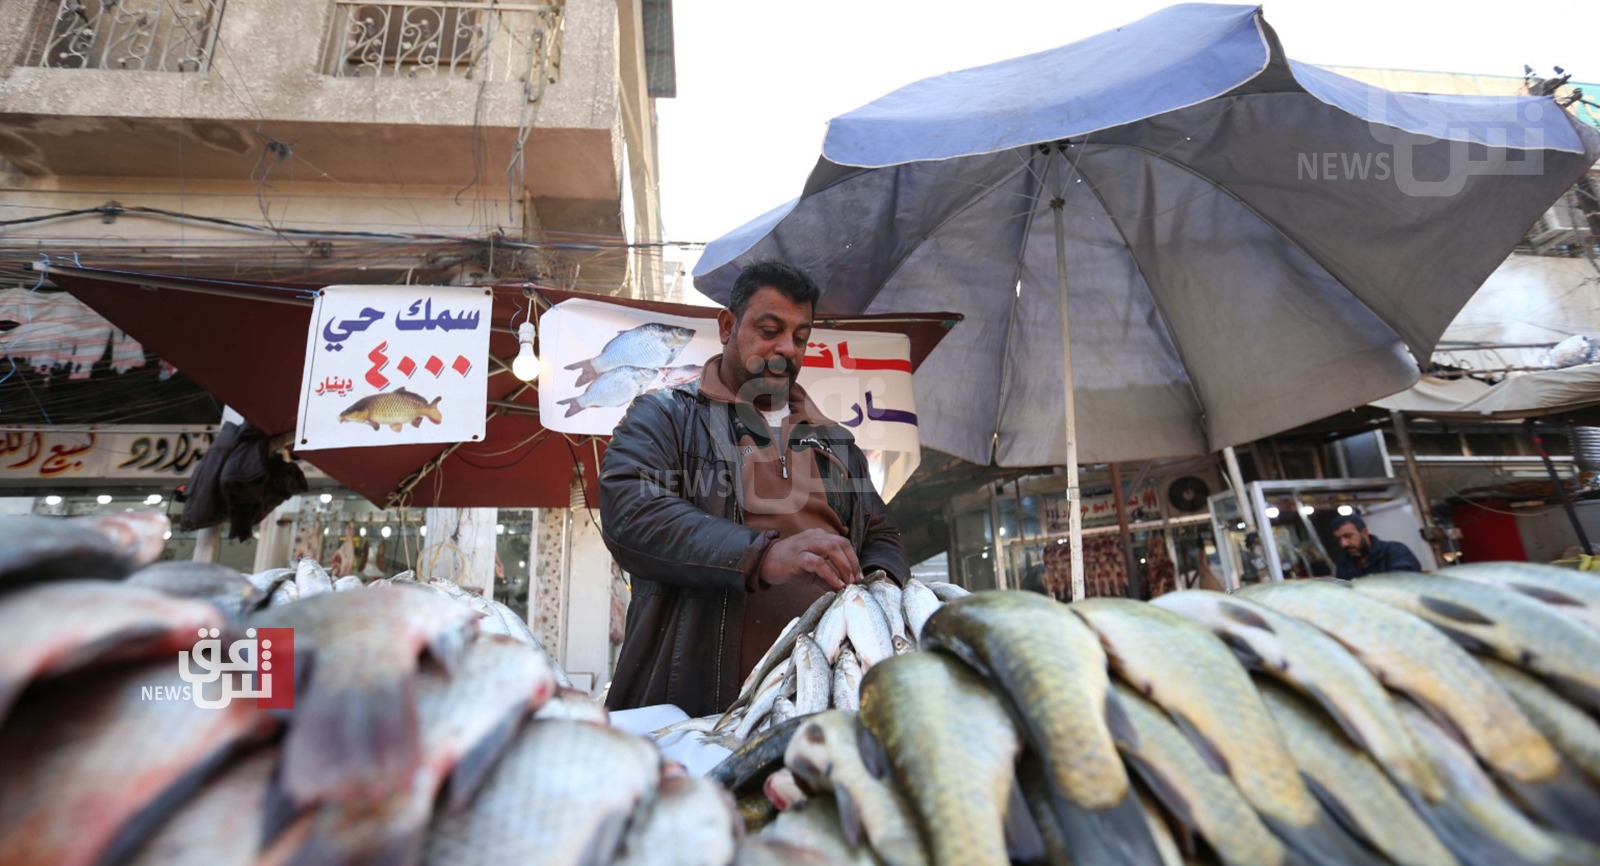 Why did fish leave Iraqis' meals?